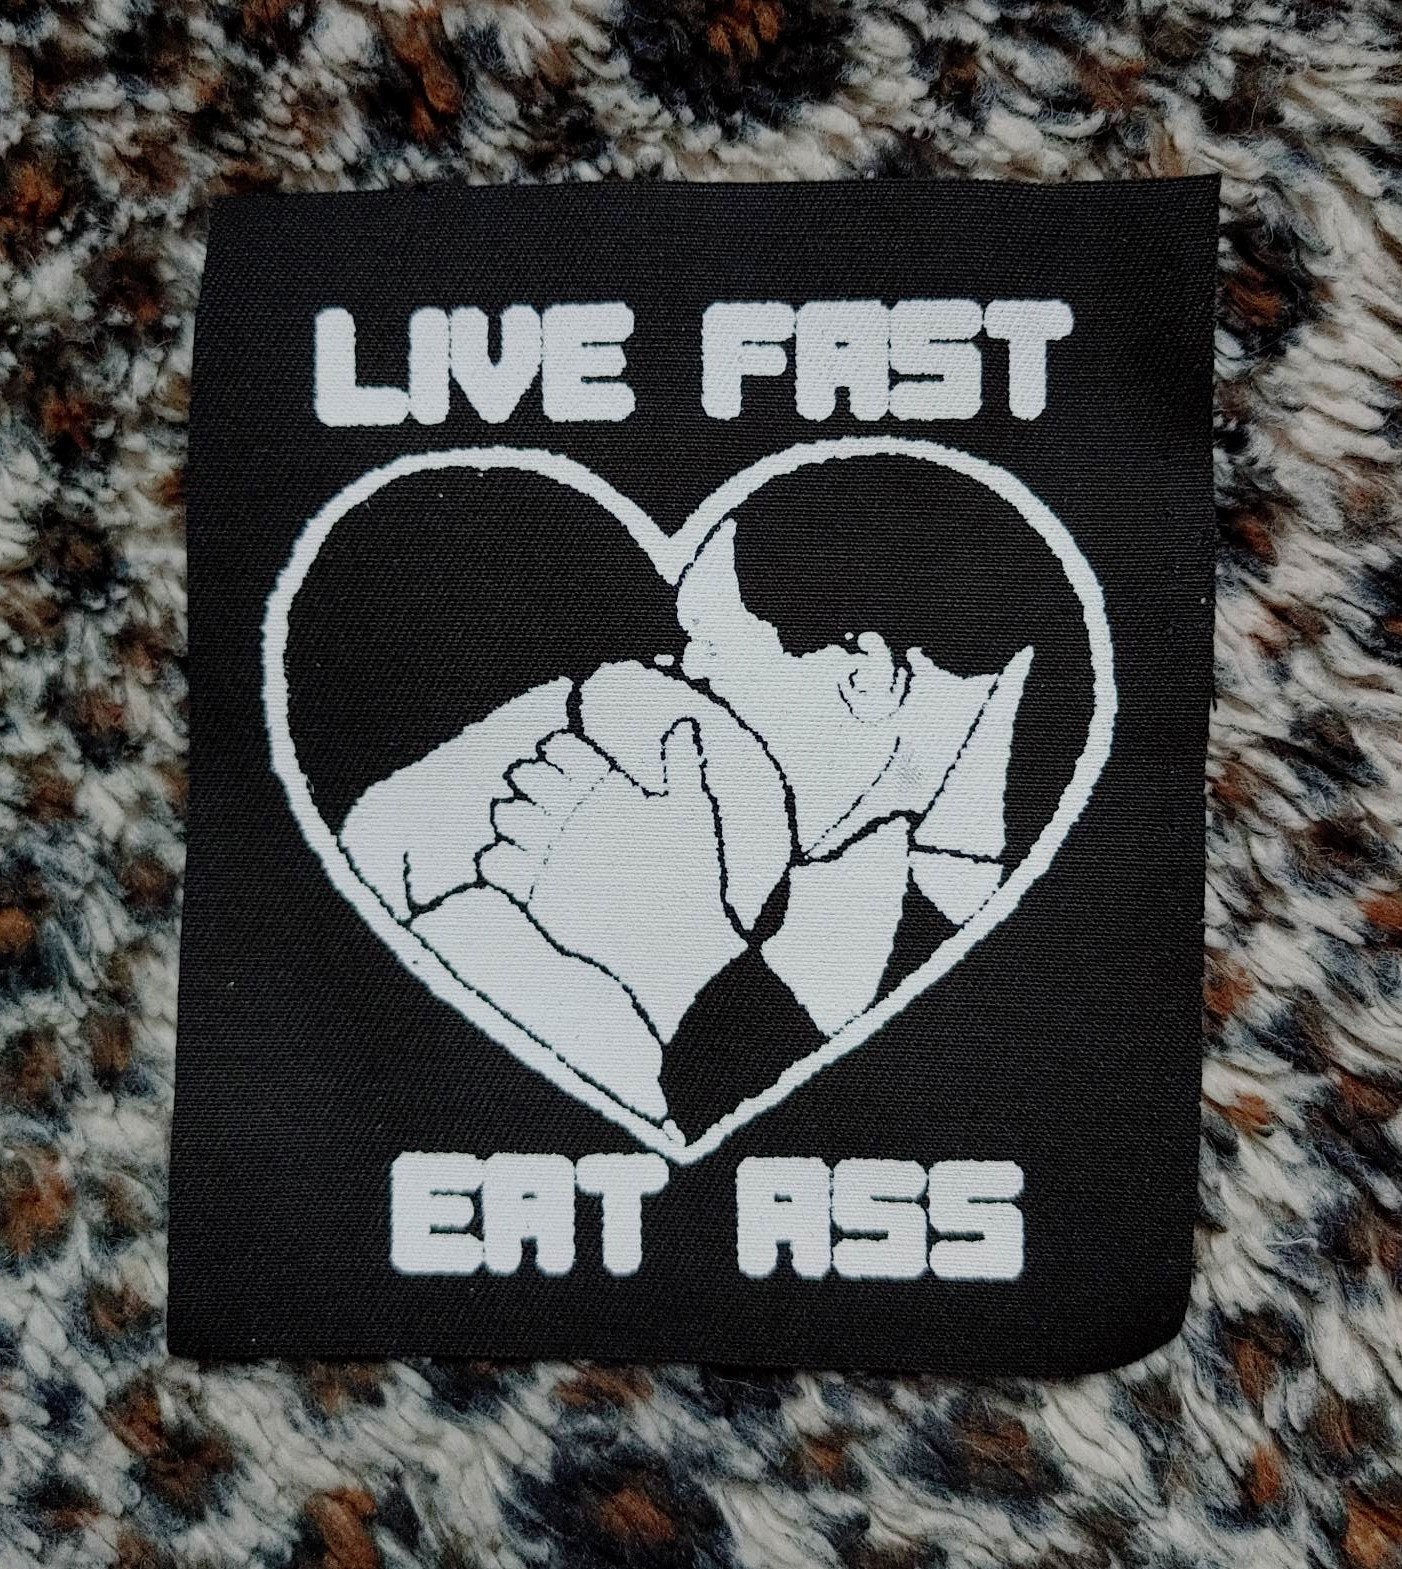 charles andrian recommends live fast eat ass pic